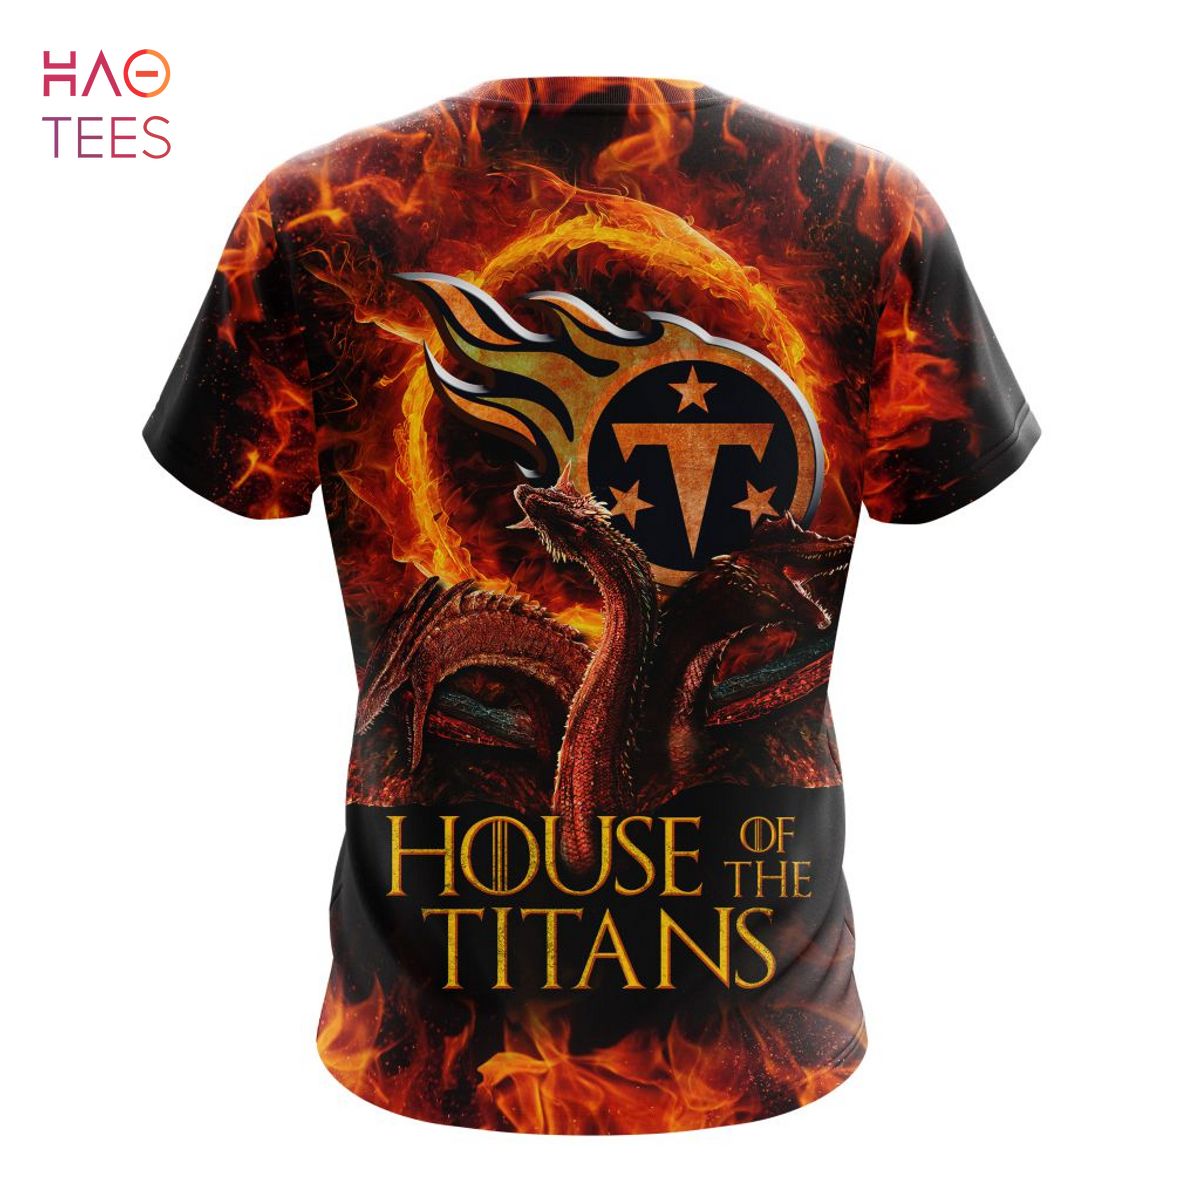 BEST NFL Tennessee Titans GAME OF THRONES - HOUSE OF THE TITANS 3D Hoodie